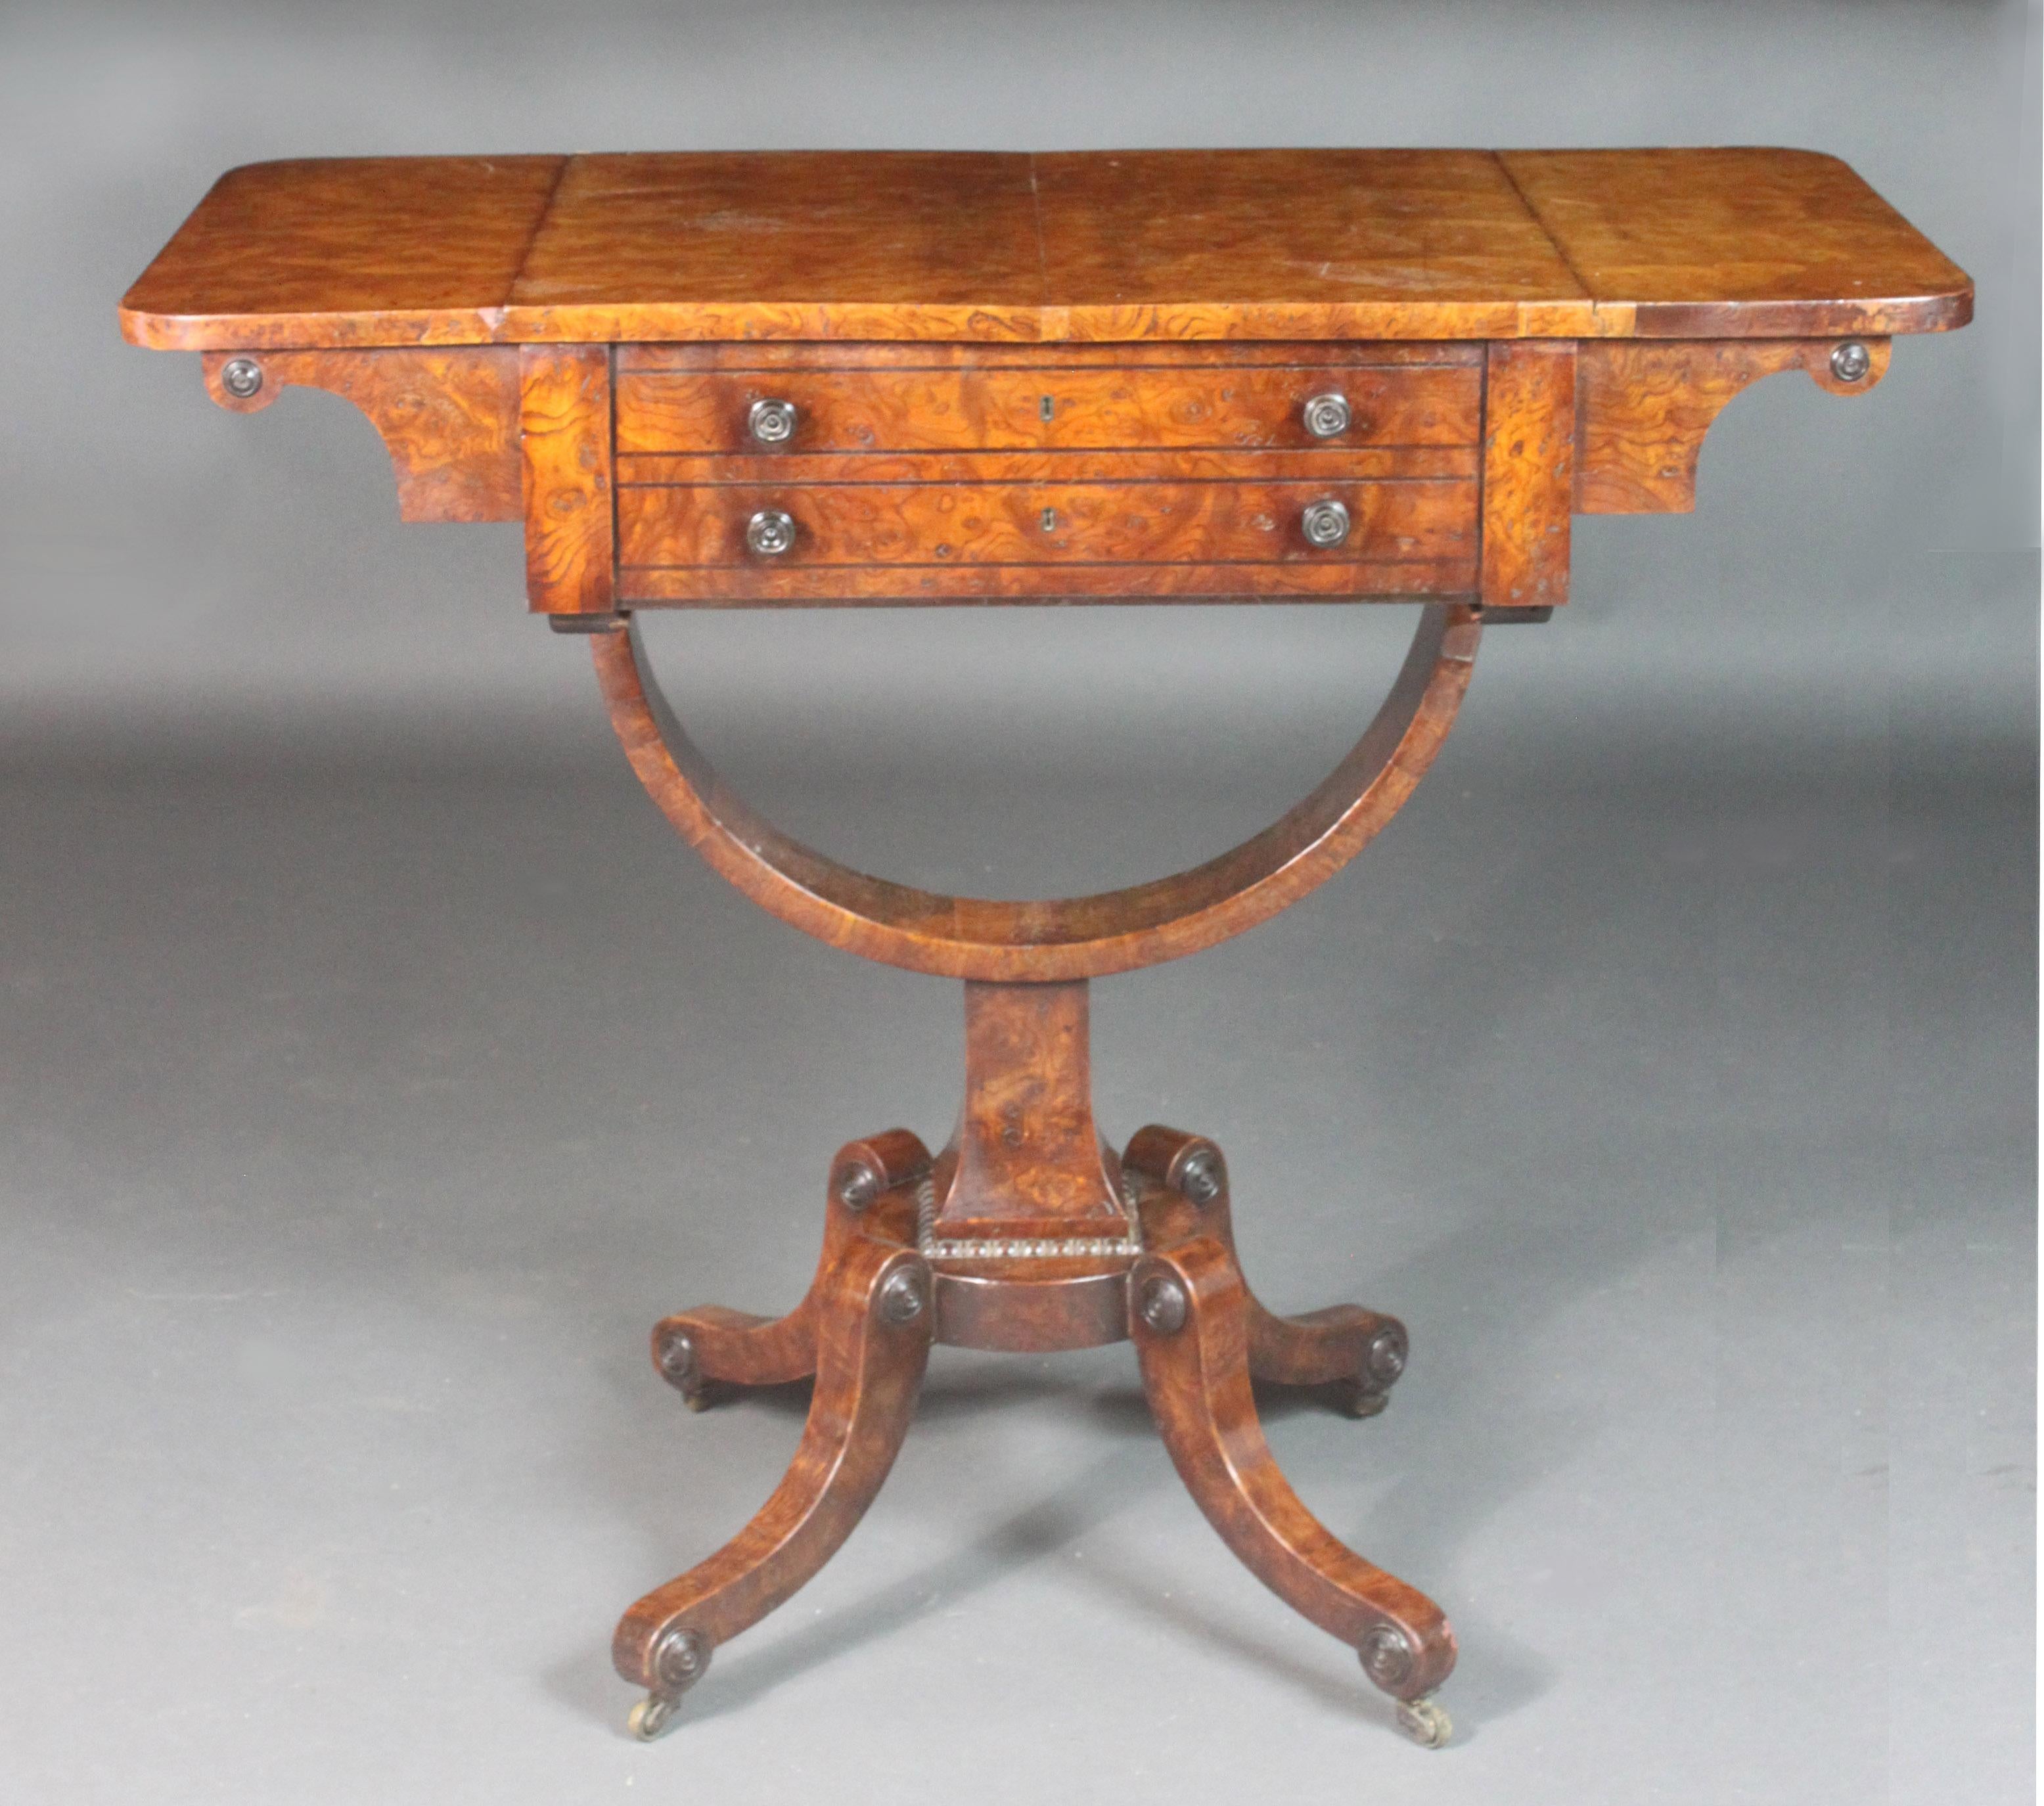 Regency sewing table in the very attractive wood, burr ash, with ebony stringing, knobs and paterae. Good original colour and patina. When open, the flaps supported by veneered lopers with more applied paterae. The base with bobbin-turned mouldings,